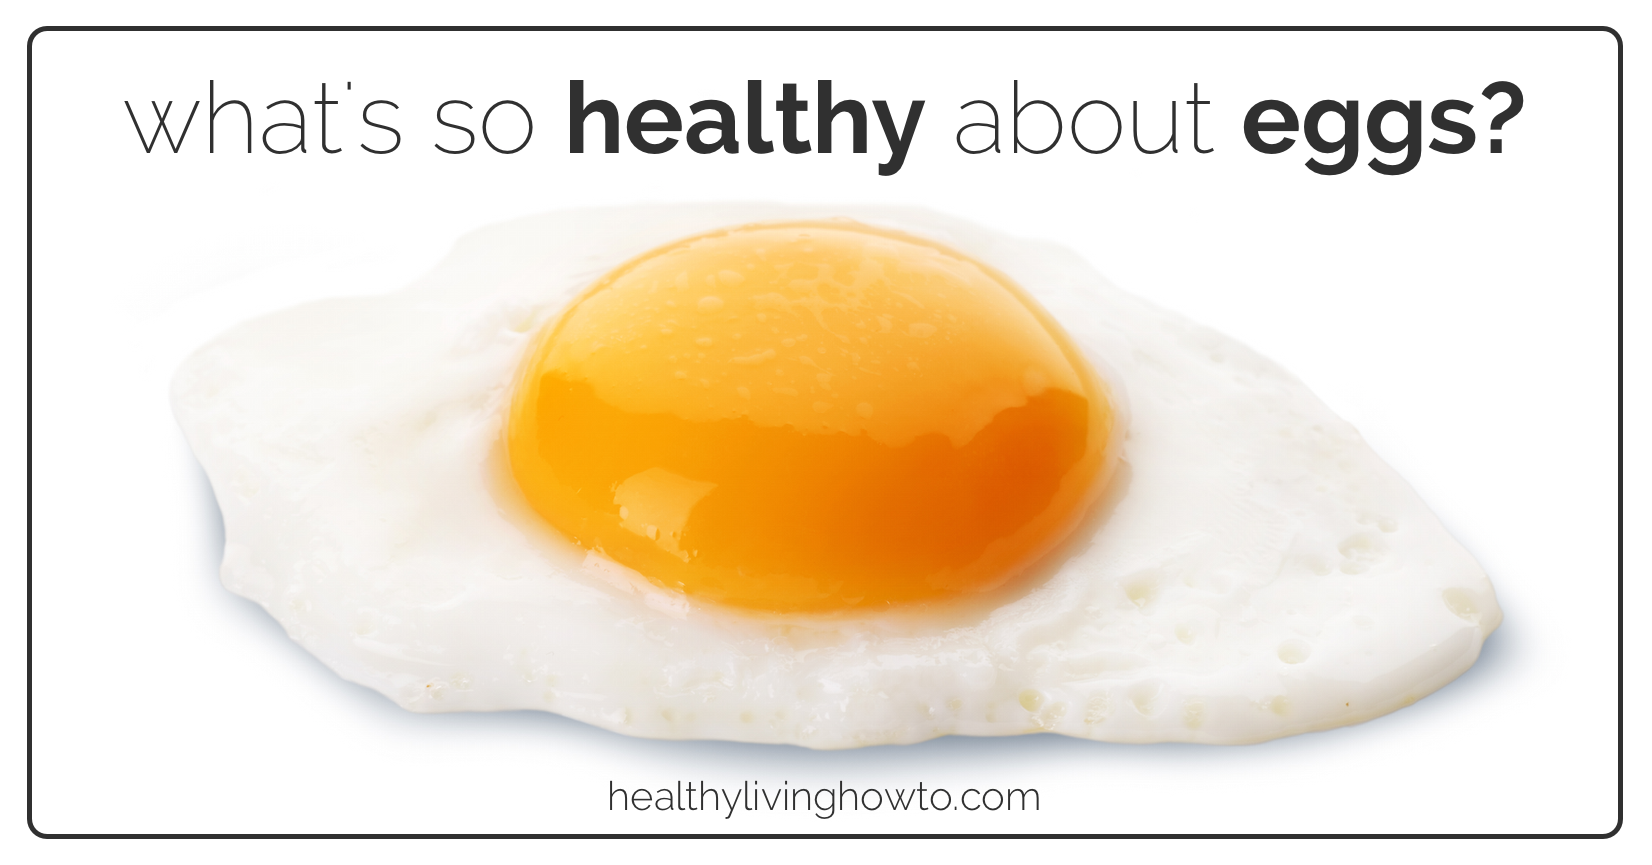 What's So Healthy About Eggs? | healthylivinghowto.com